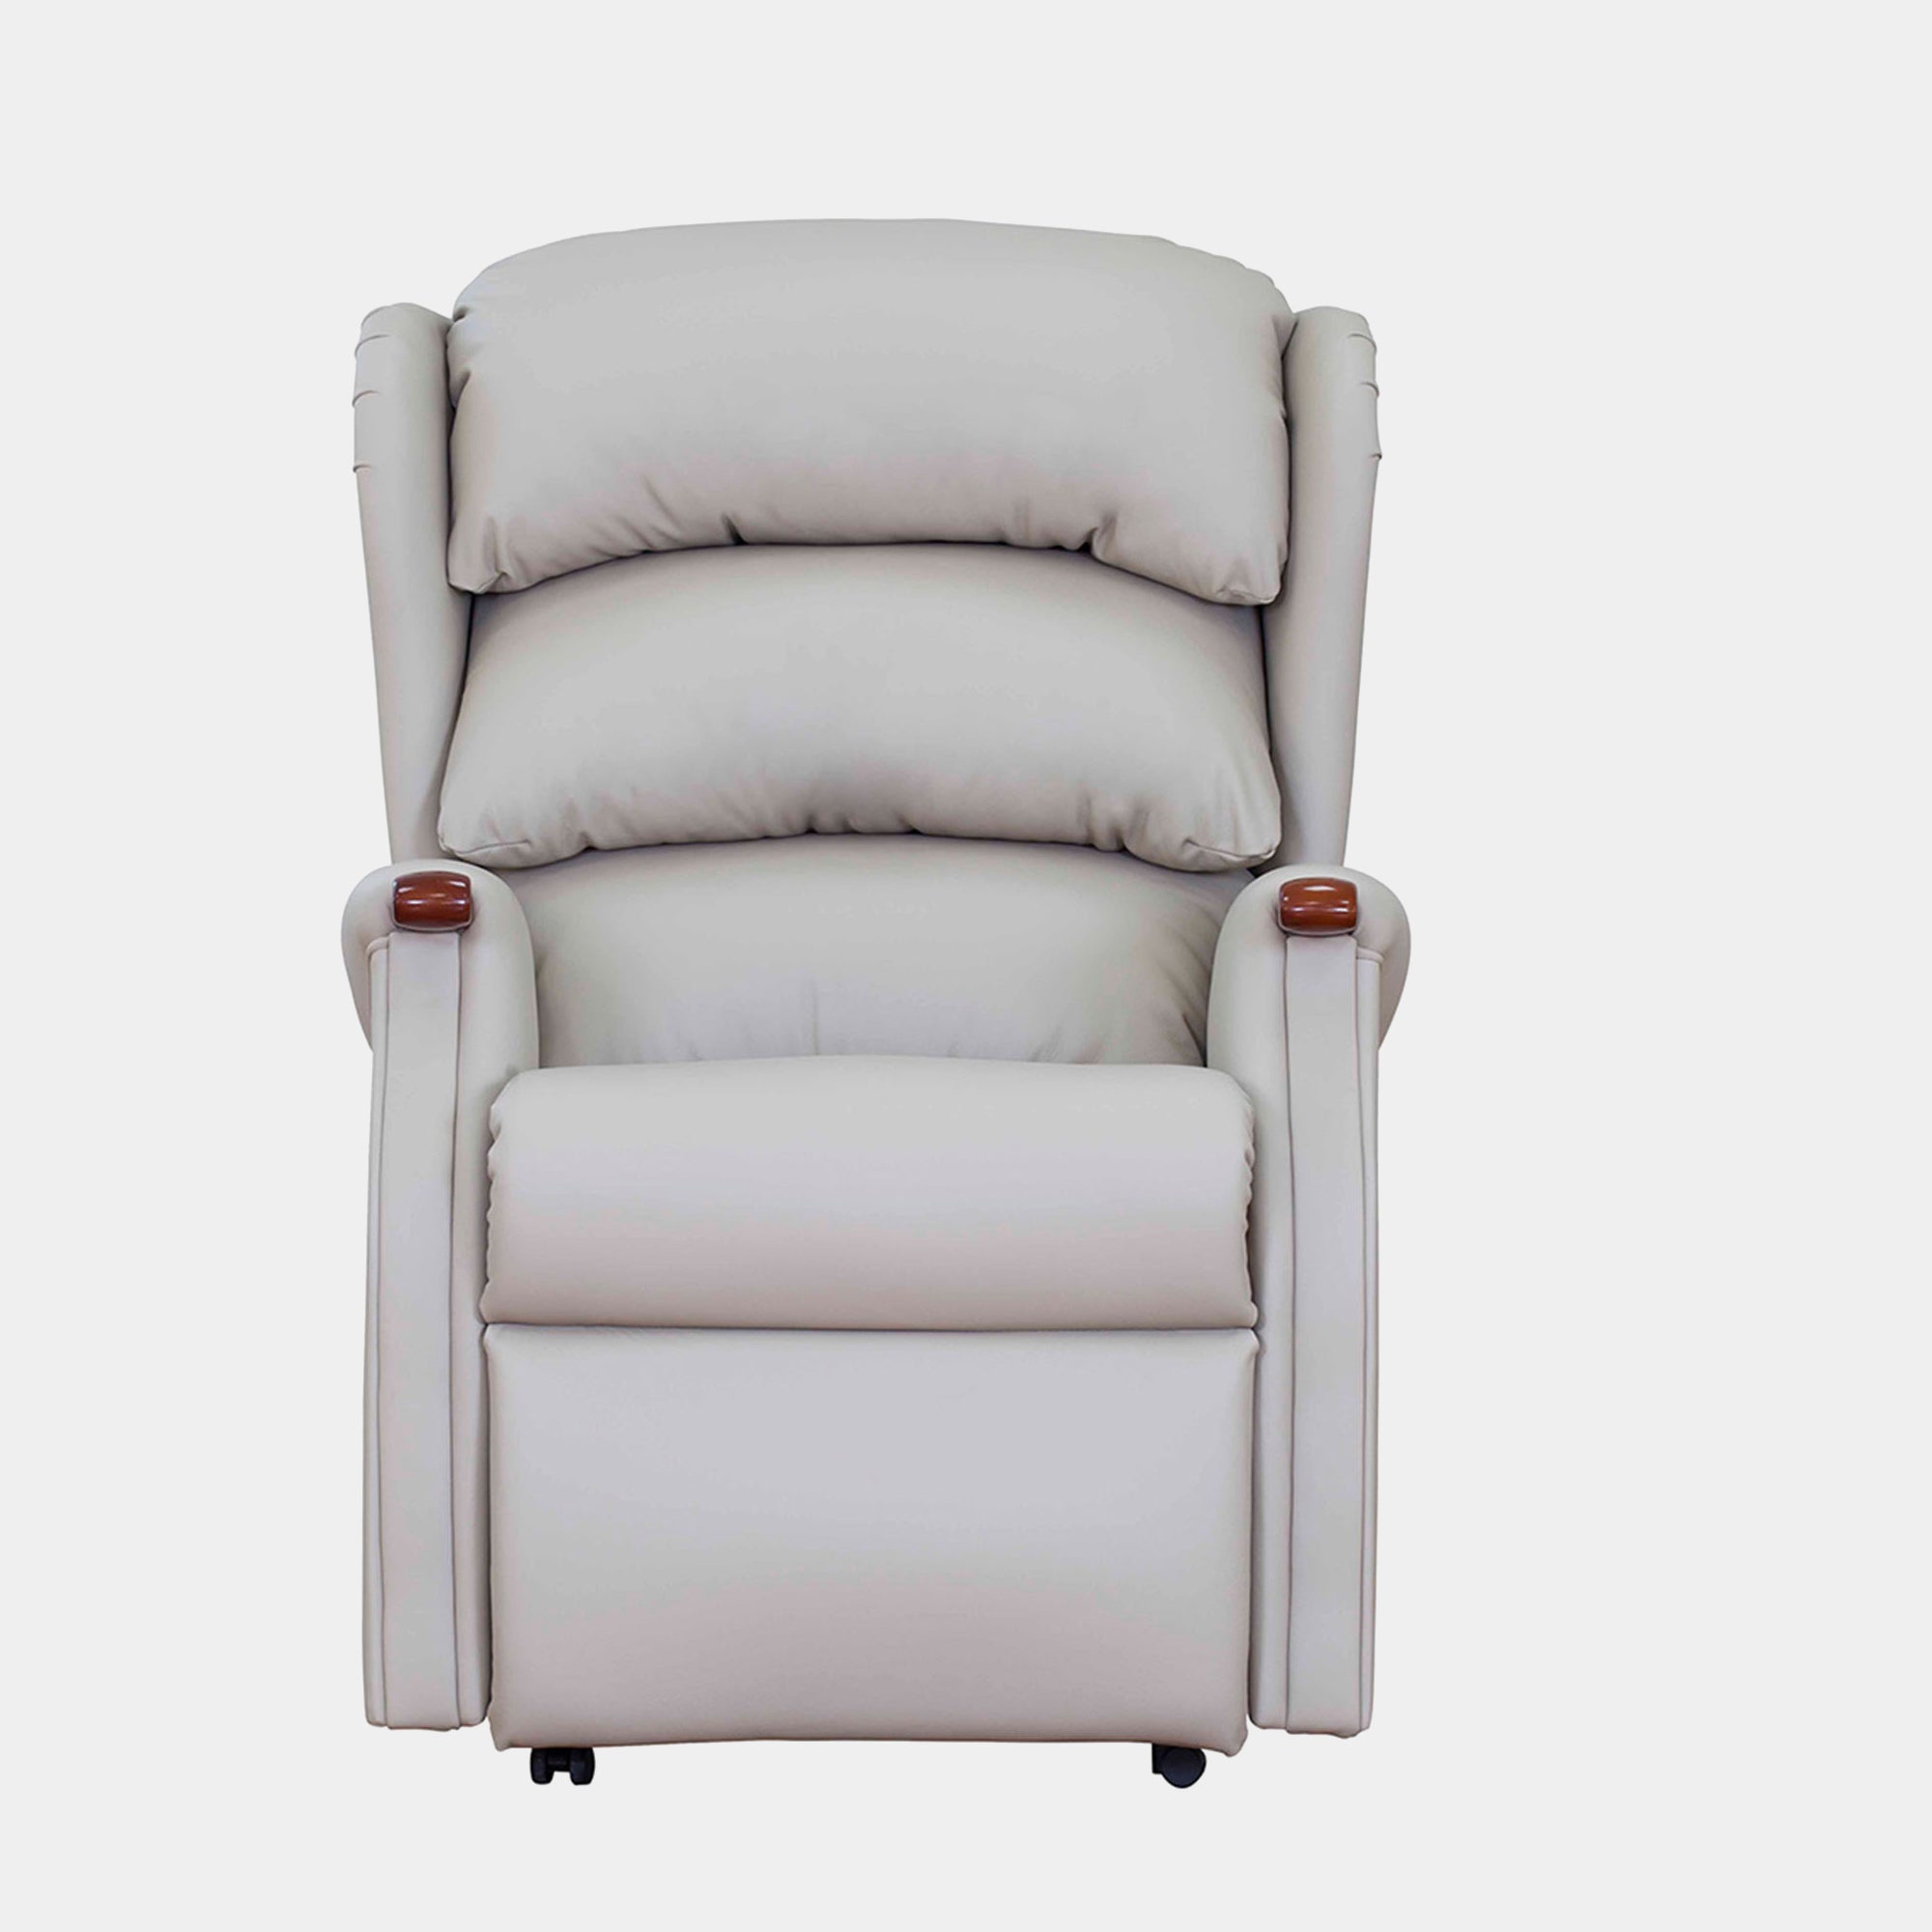 New Woodstock - Petite Manual Recliner In Leather